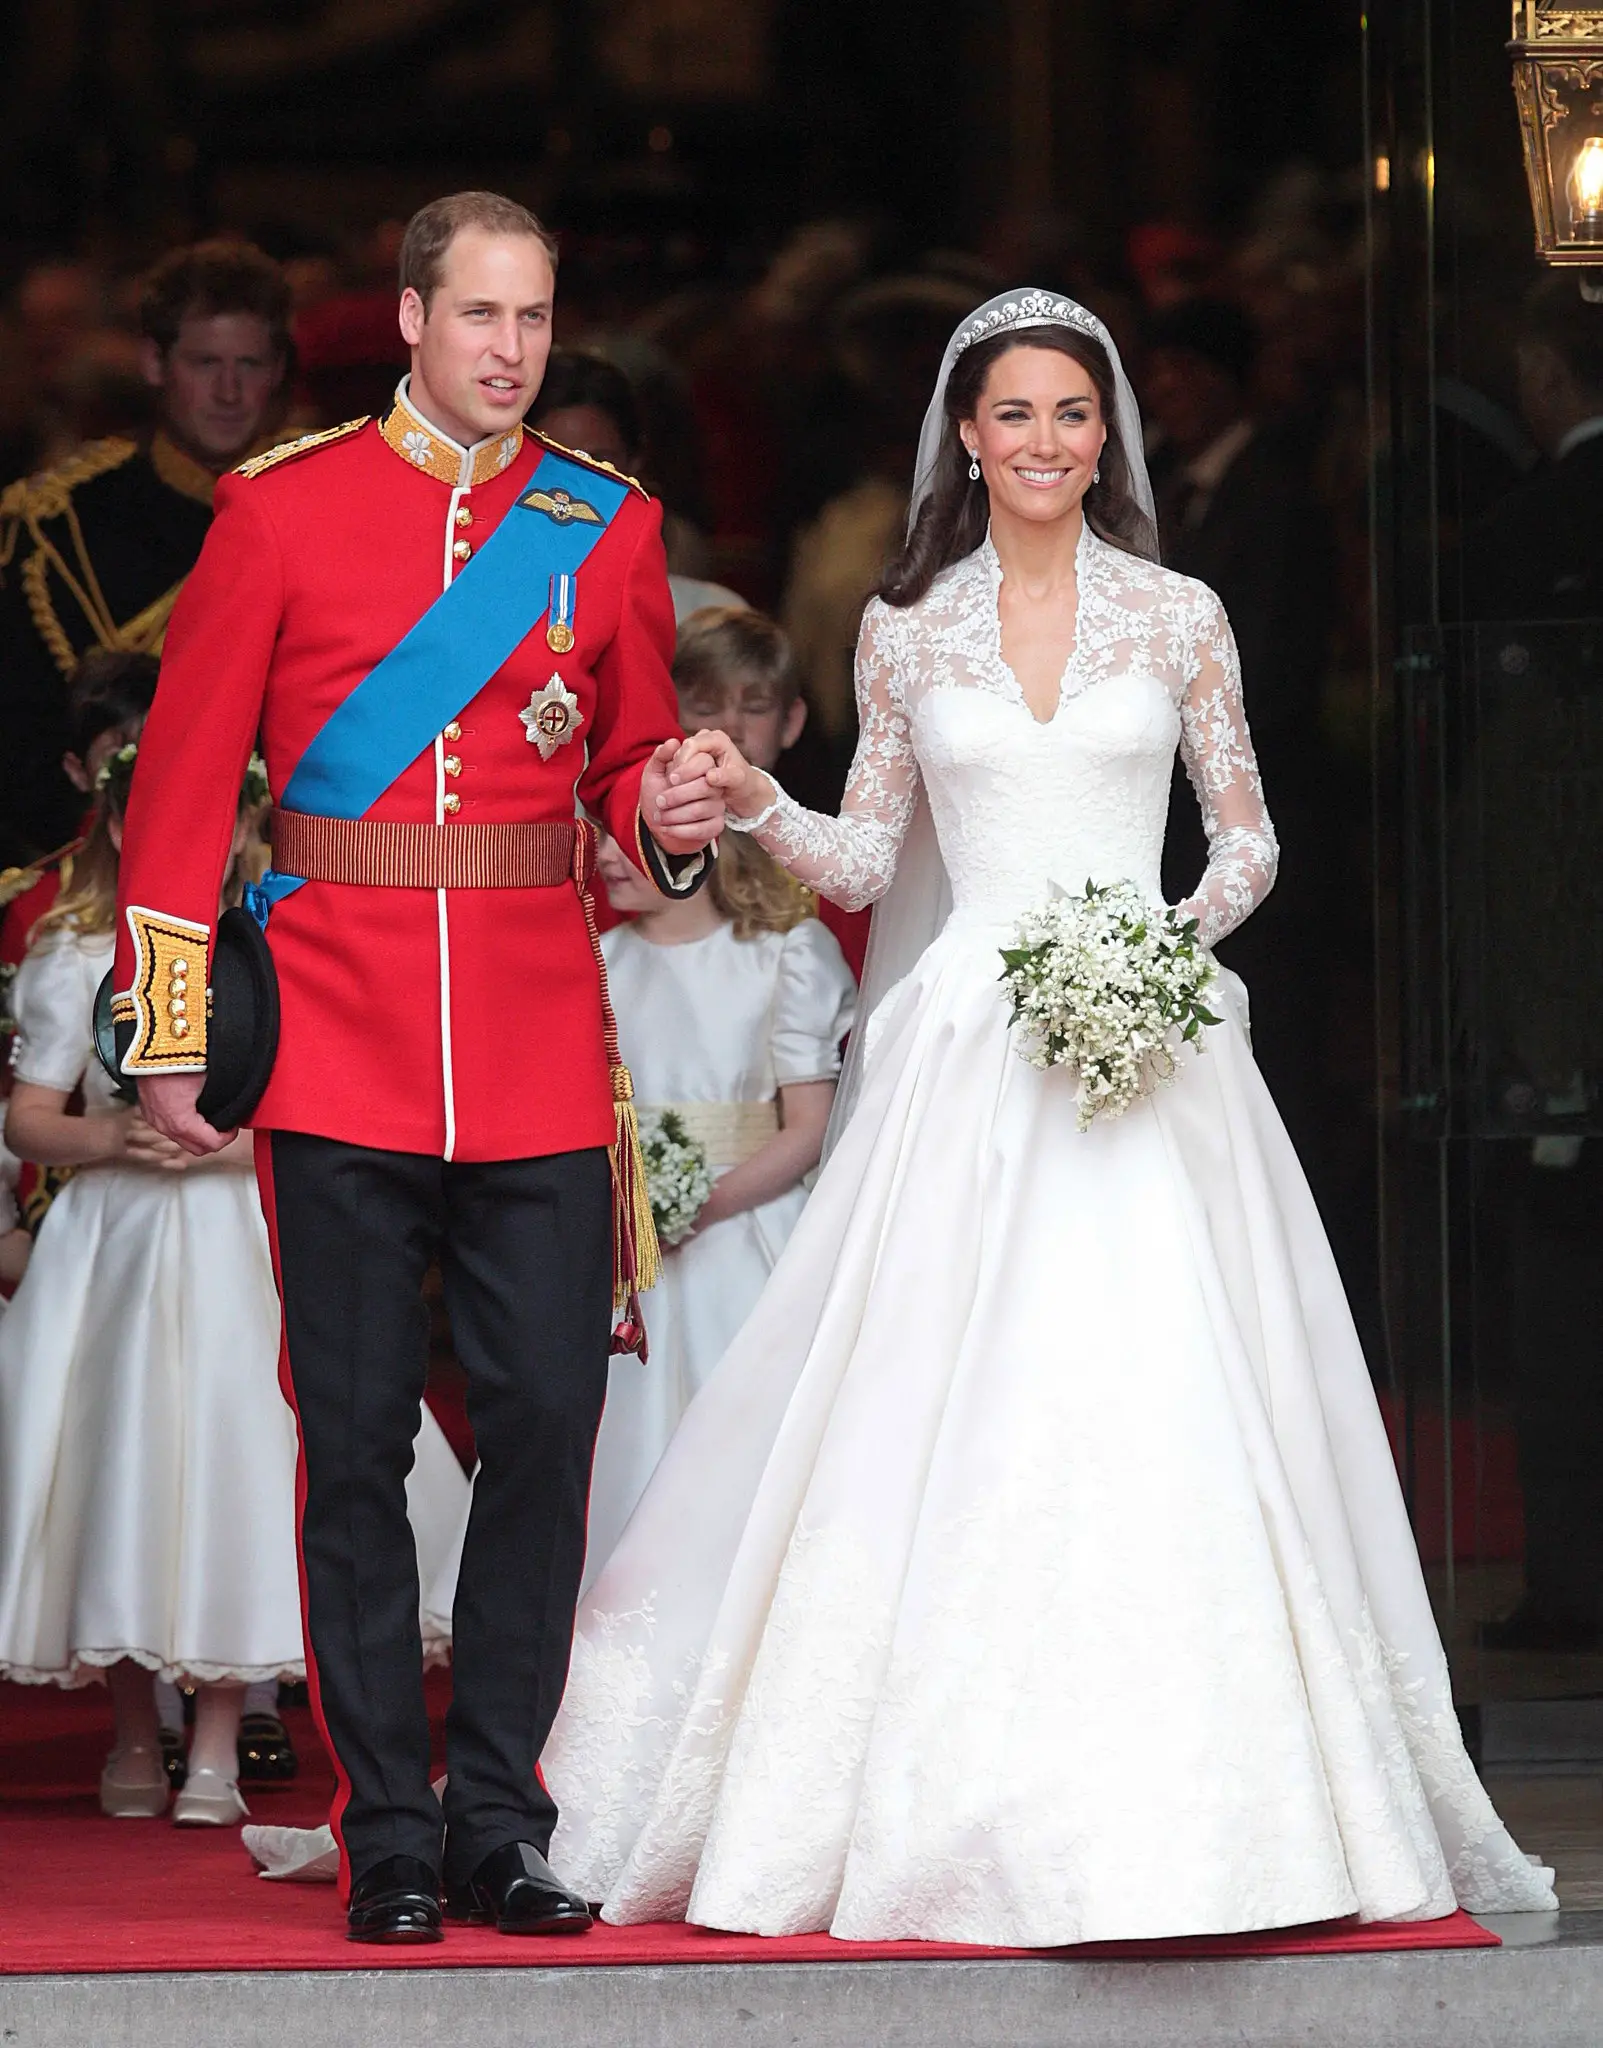 Duke and Duchess of Cambridge at the doors of Westminster Abbey on their wedding Day